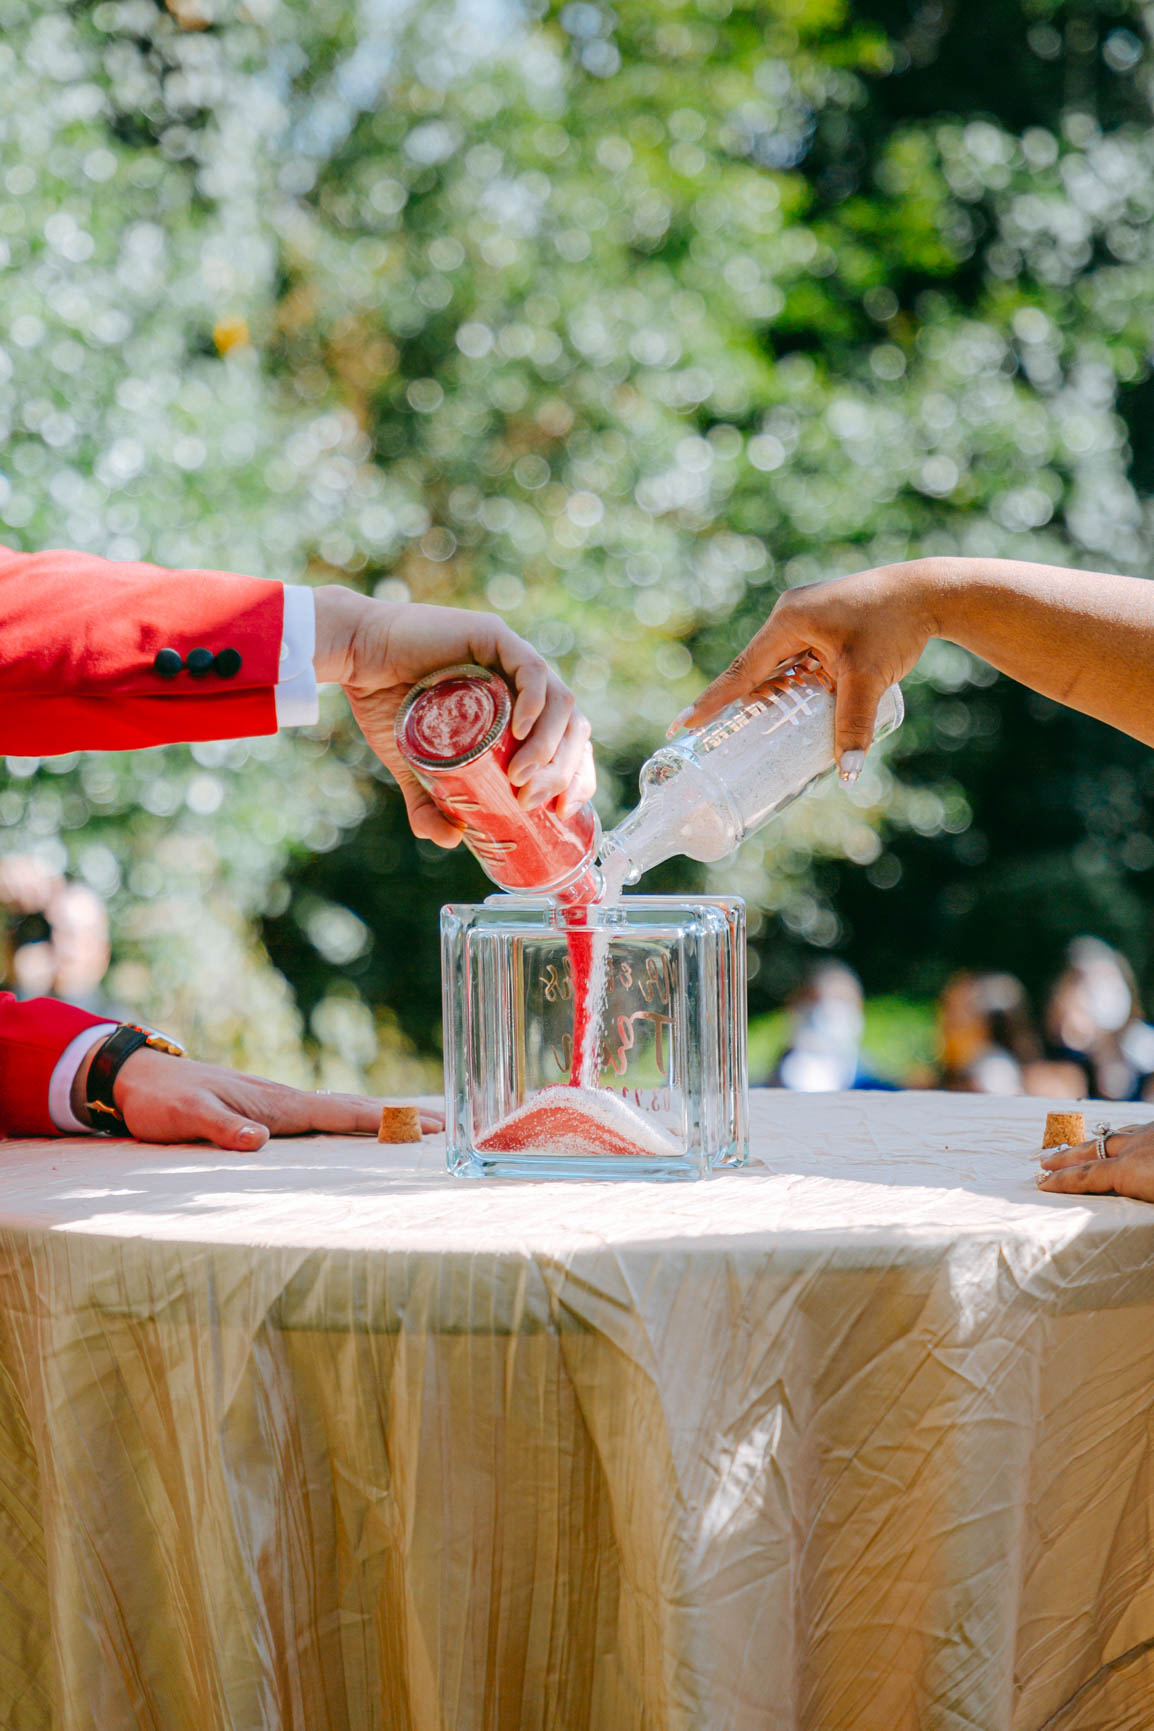 bride and groom pouring unity sand ceremony at Separk Mansion in Gastonia NC shot by Nhieu Tang Photography | nhieutang.com